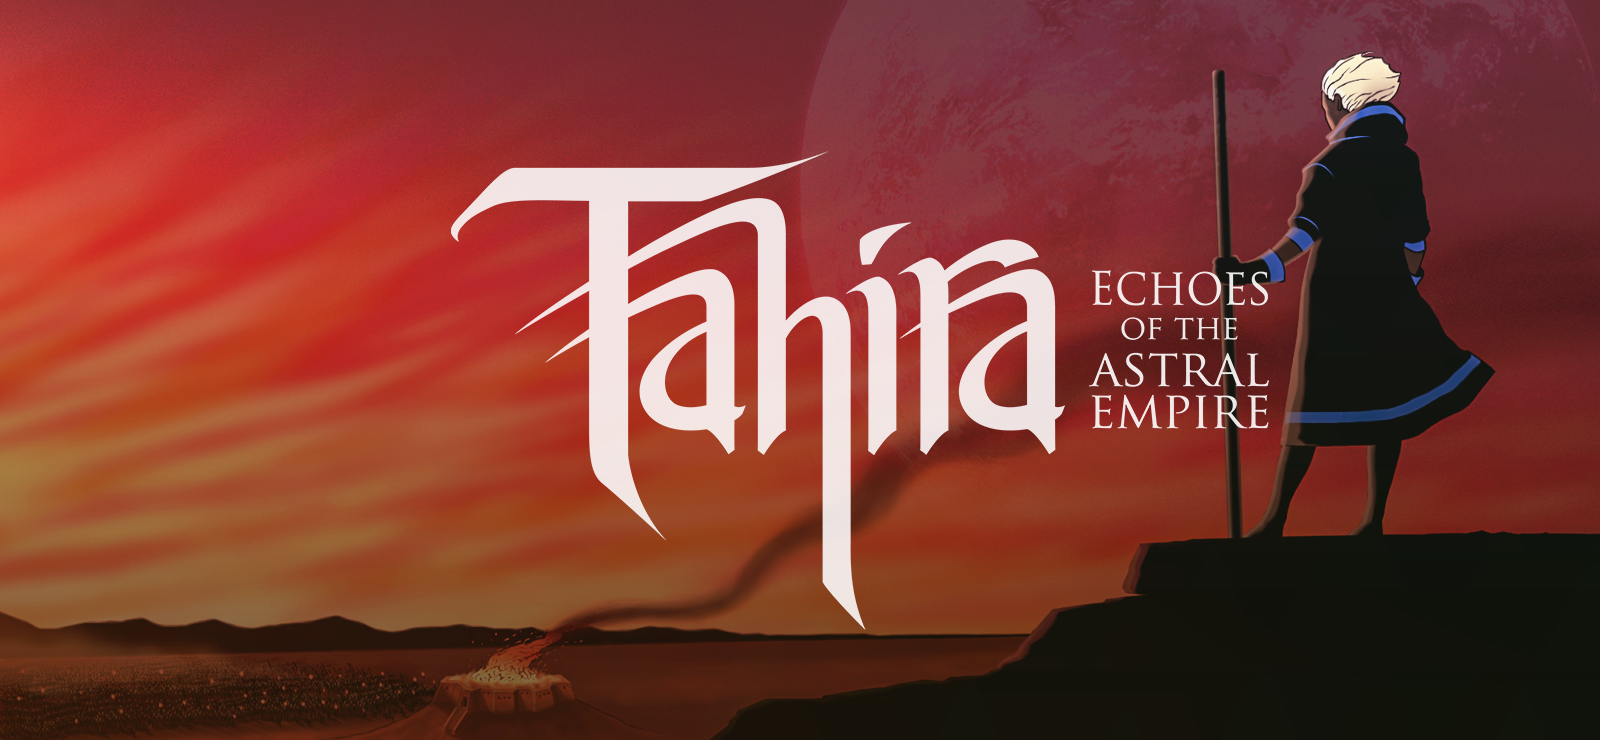 Tahira: Echoes Of The Astral Empire